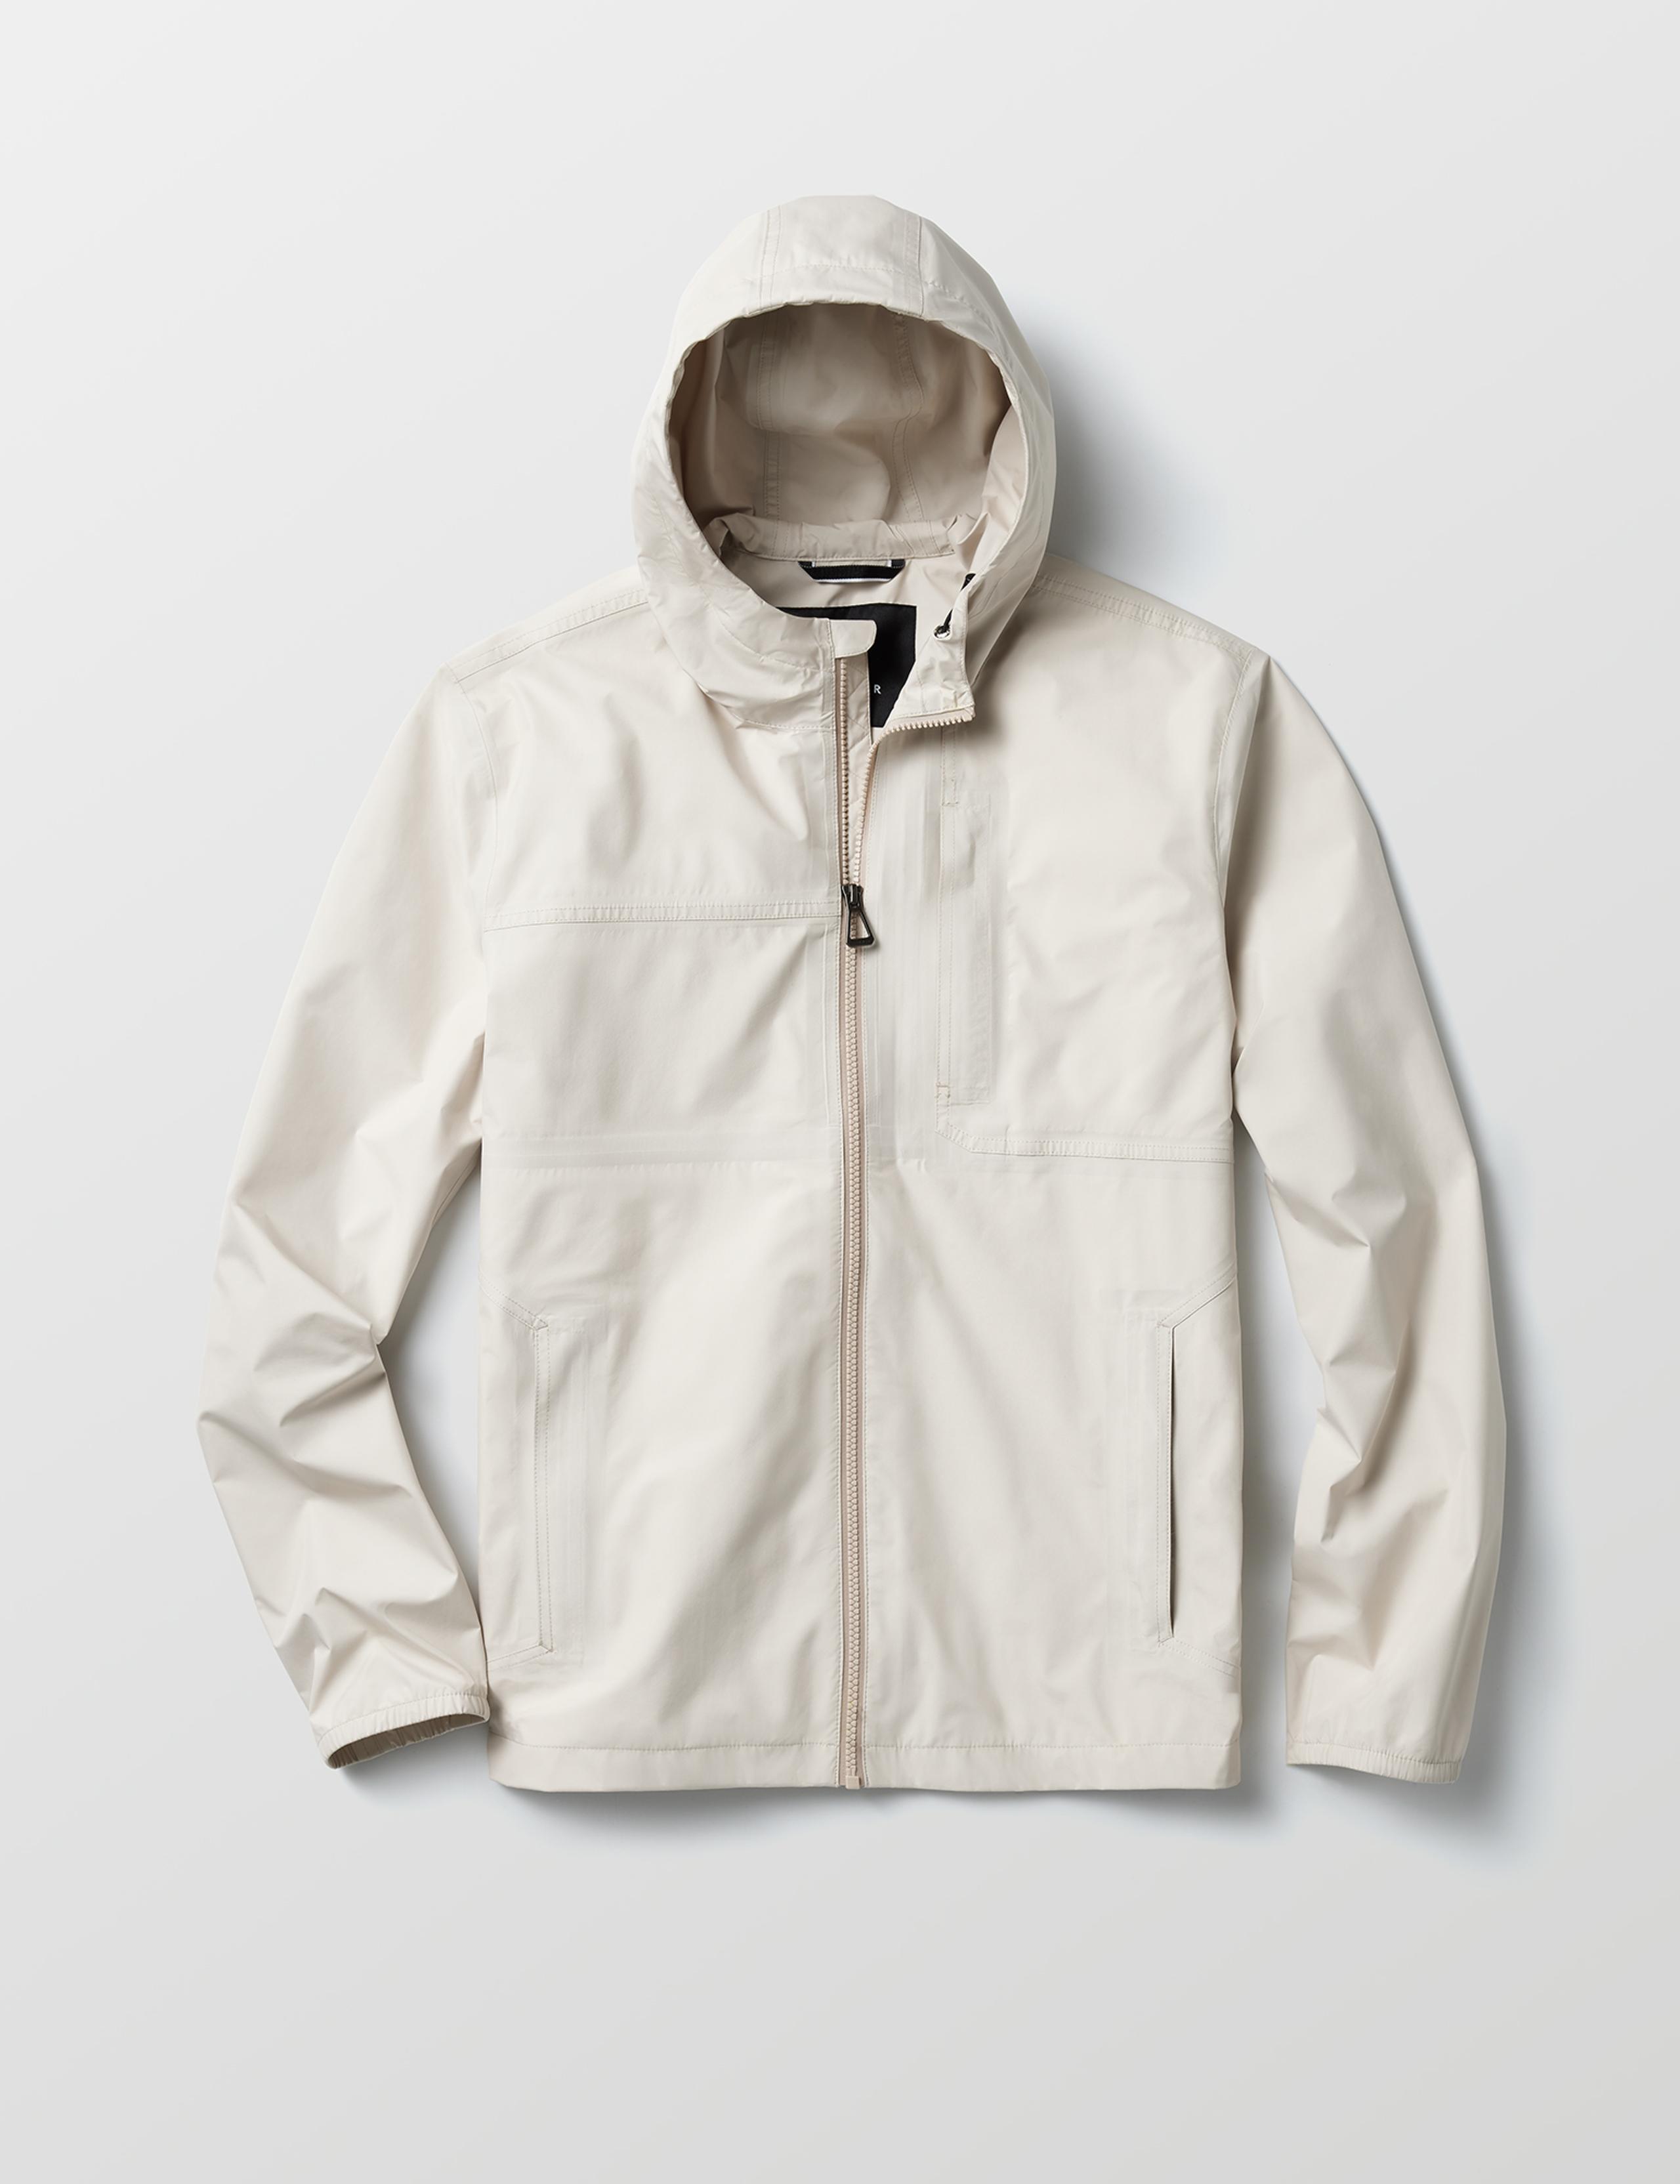 M-Storm All-Weather Jacket in Bone.